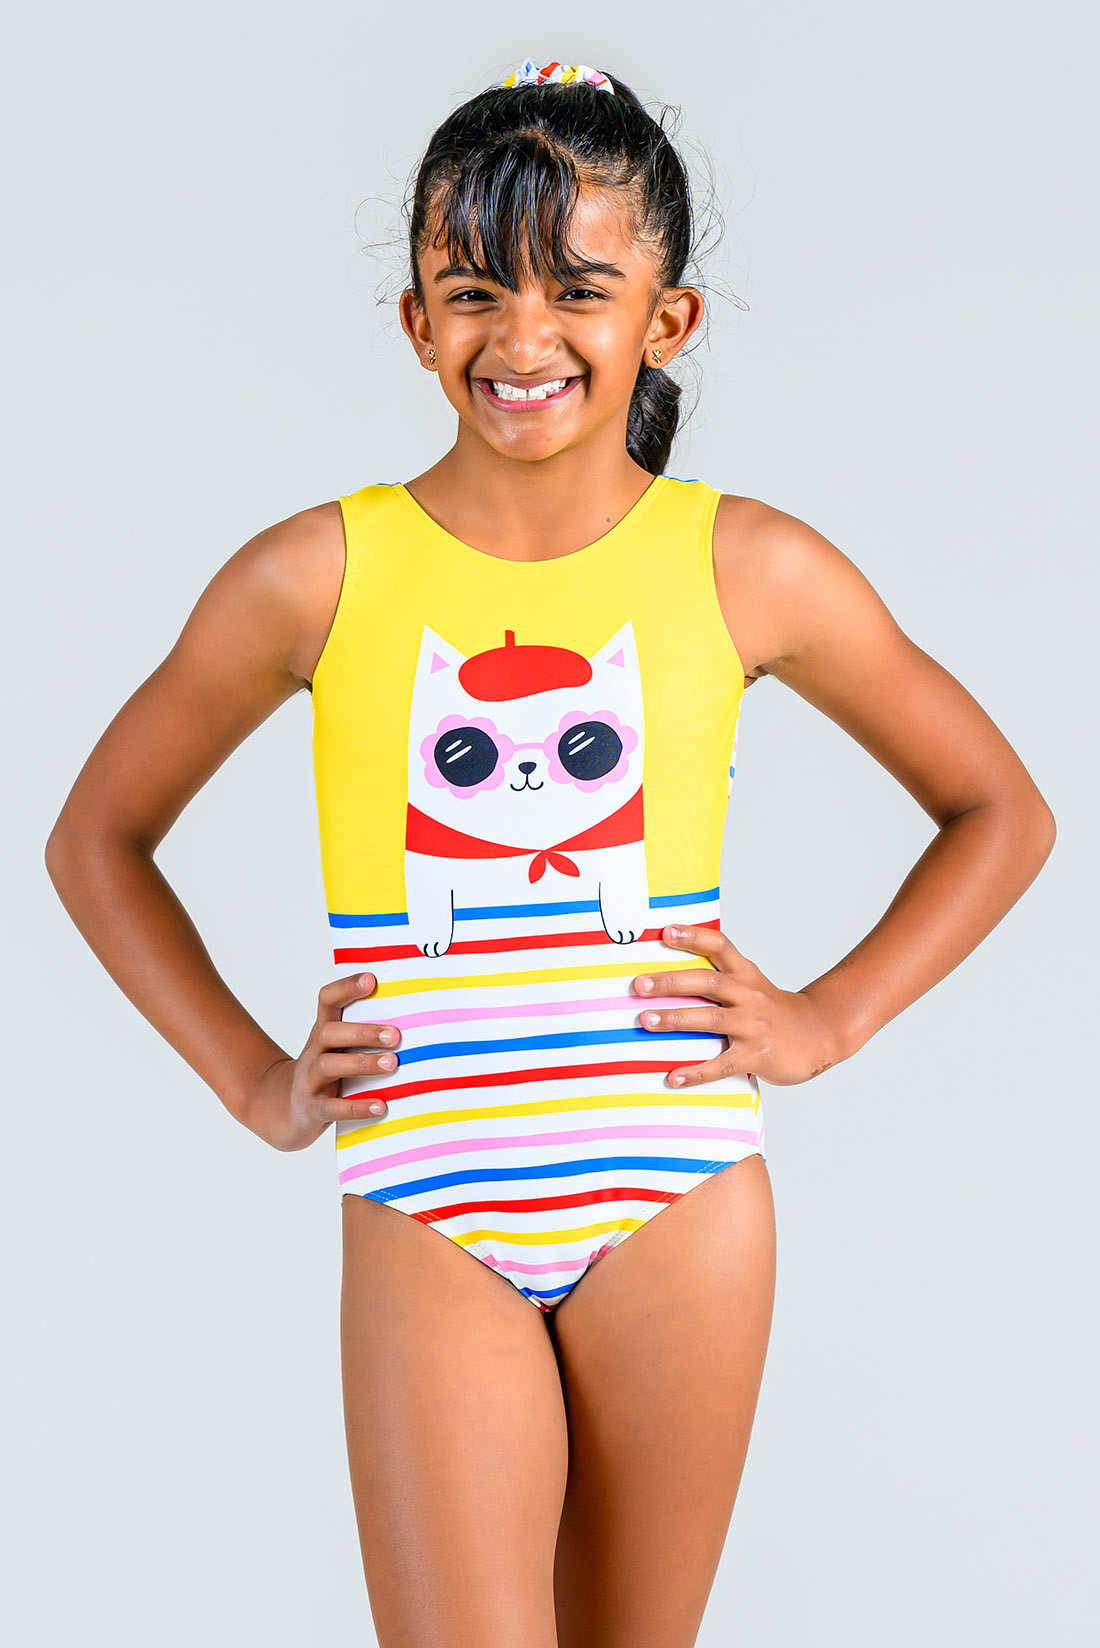 Shop Gymnastics Outfits for Toddlers by Destira